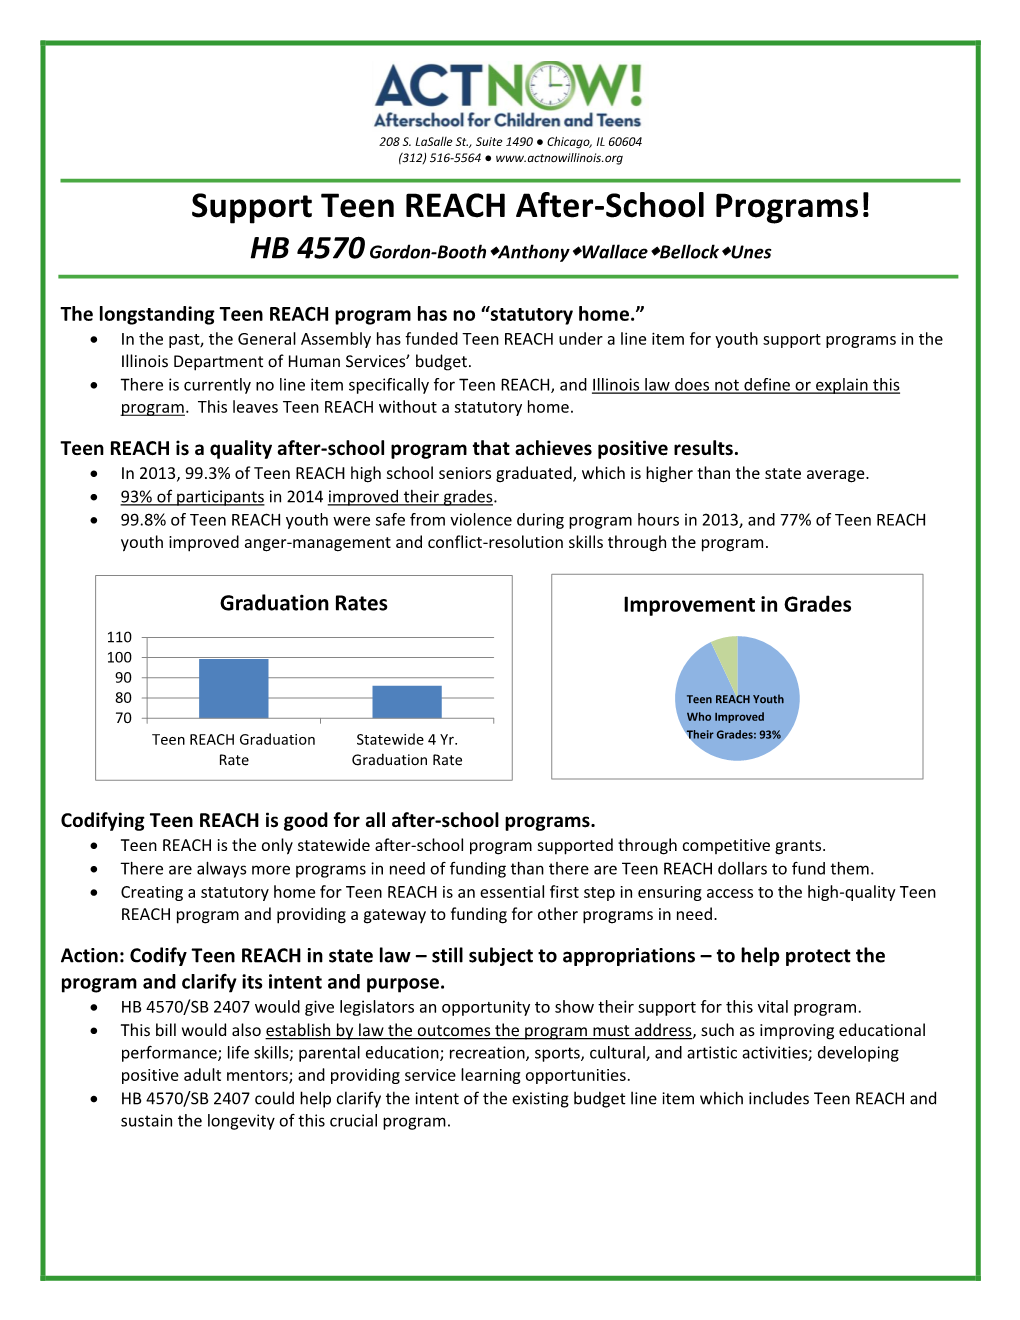 Support Teen REACH After-School Programs! HB 4570 Gordon-Boothanthonywallacebellockunes